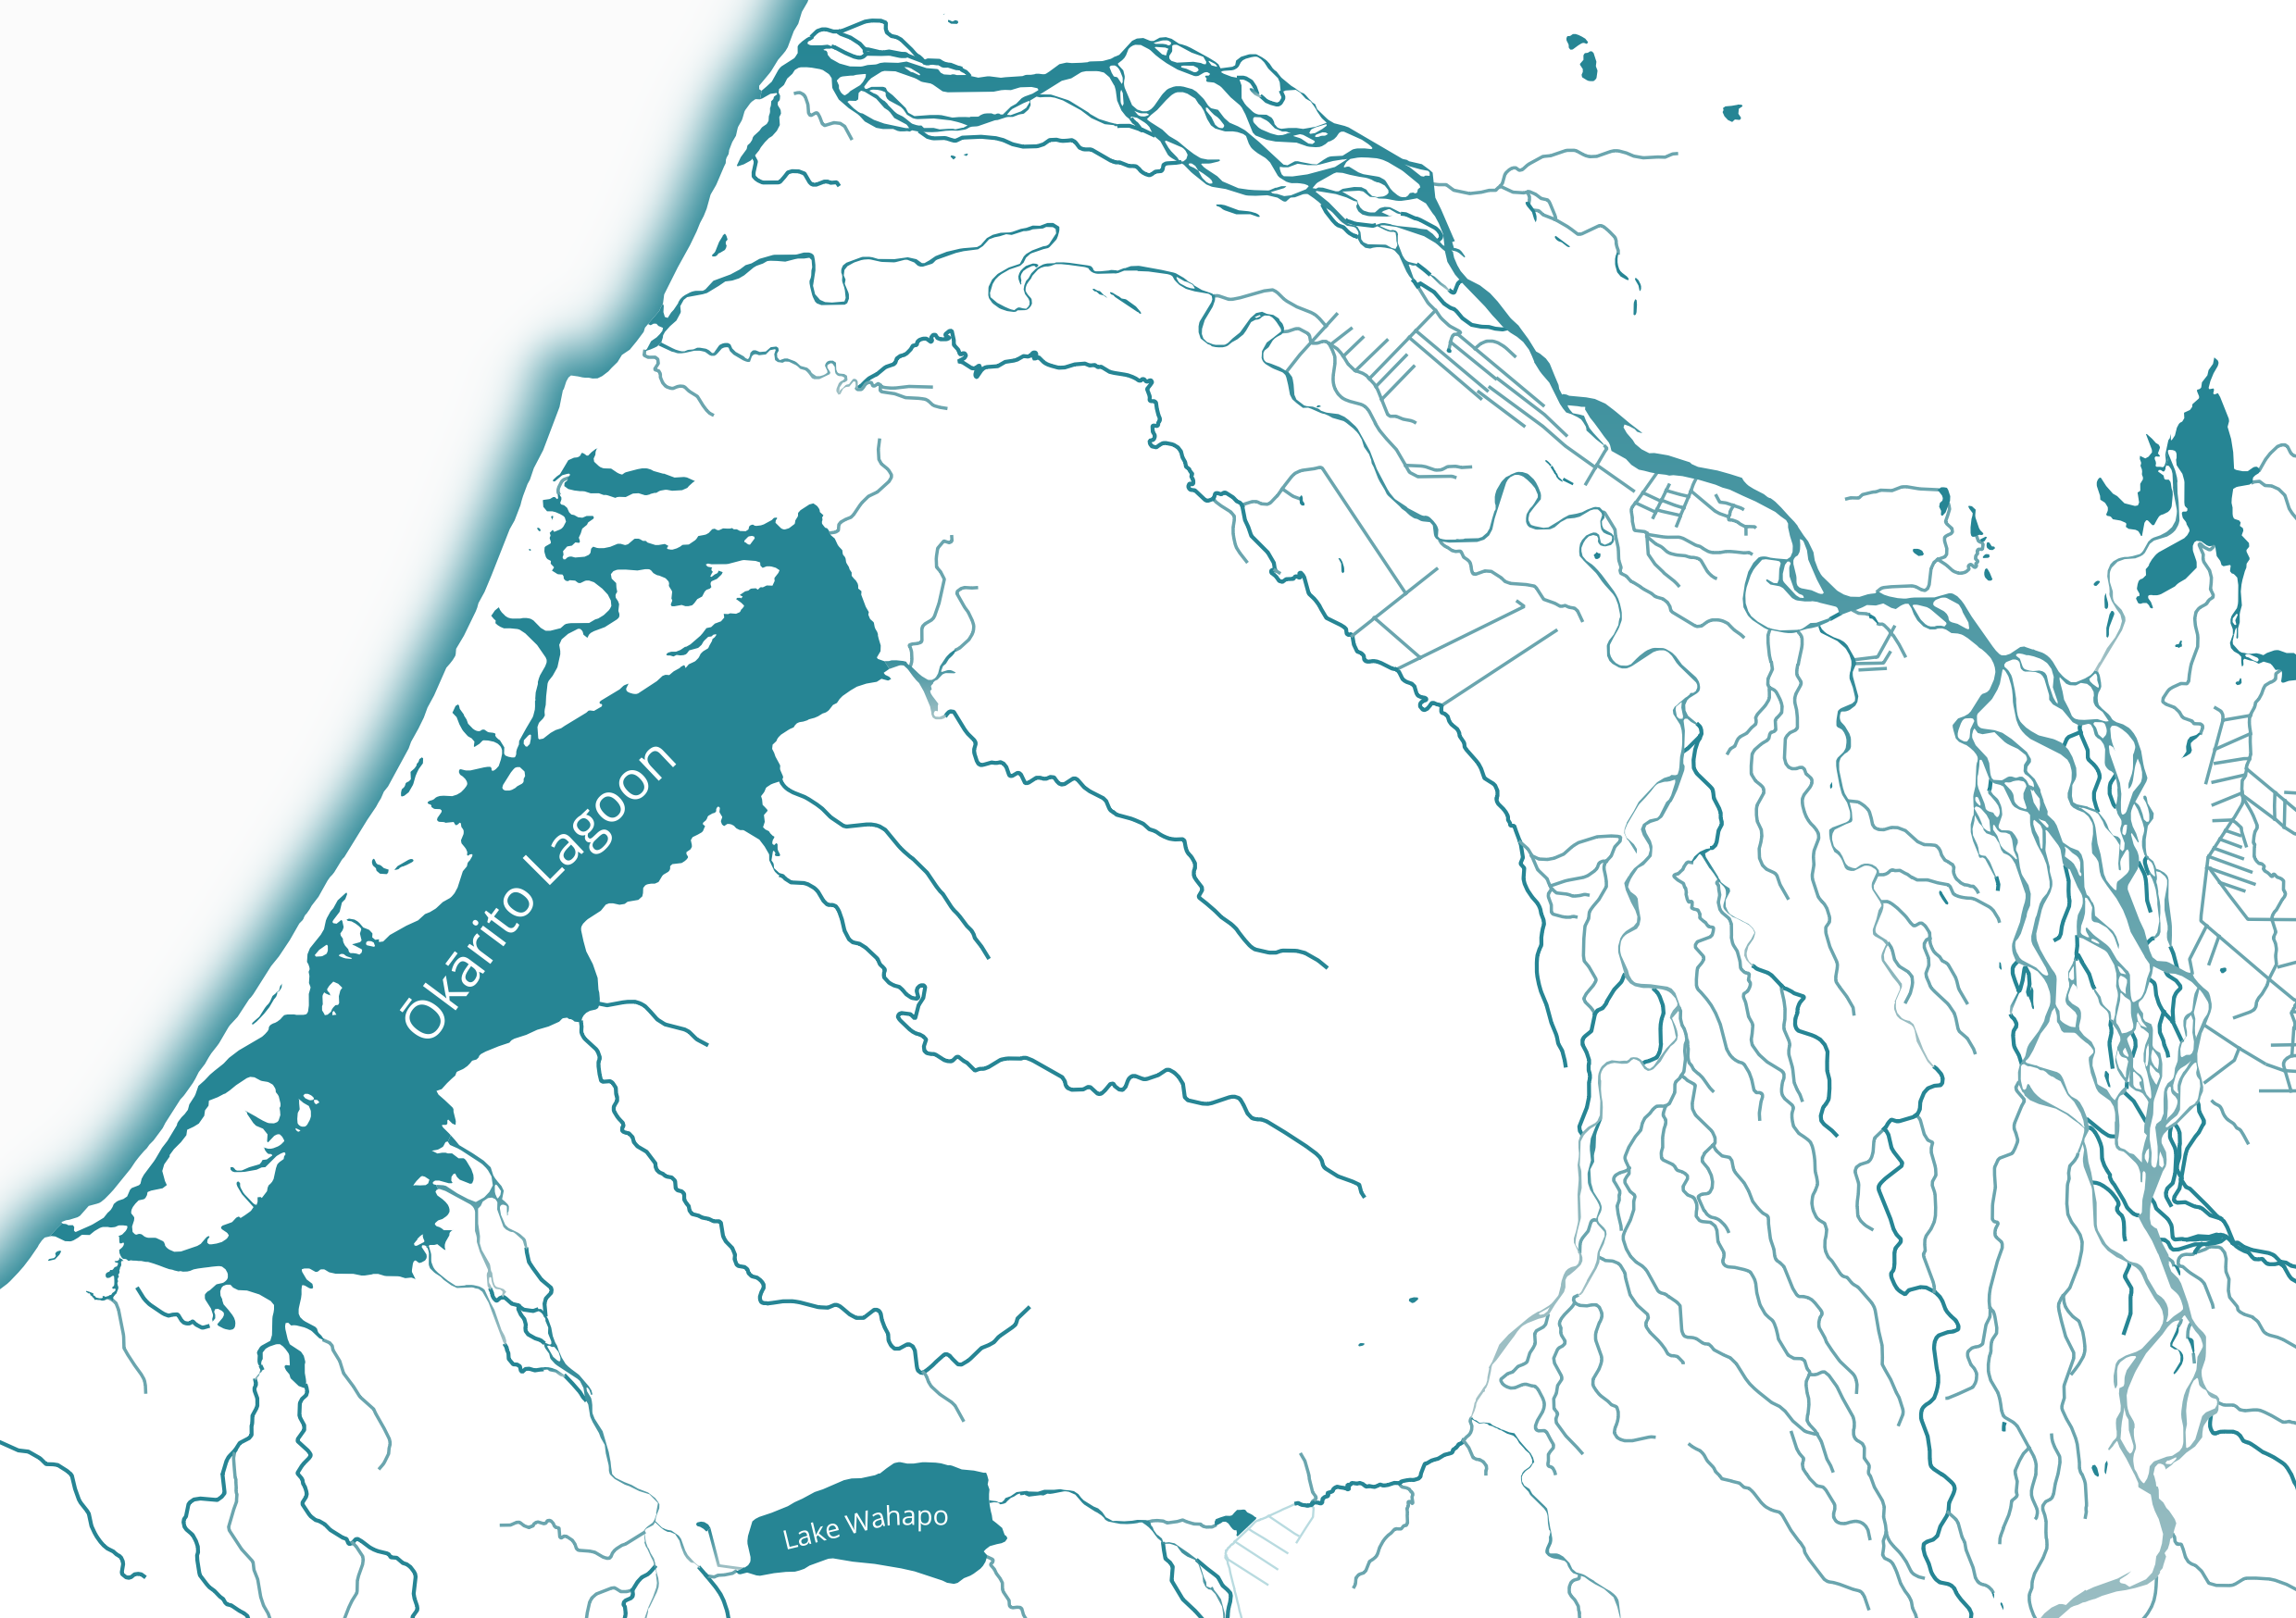 NZ Lake polygons provide missing links in a river system